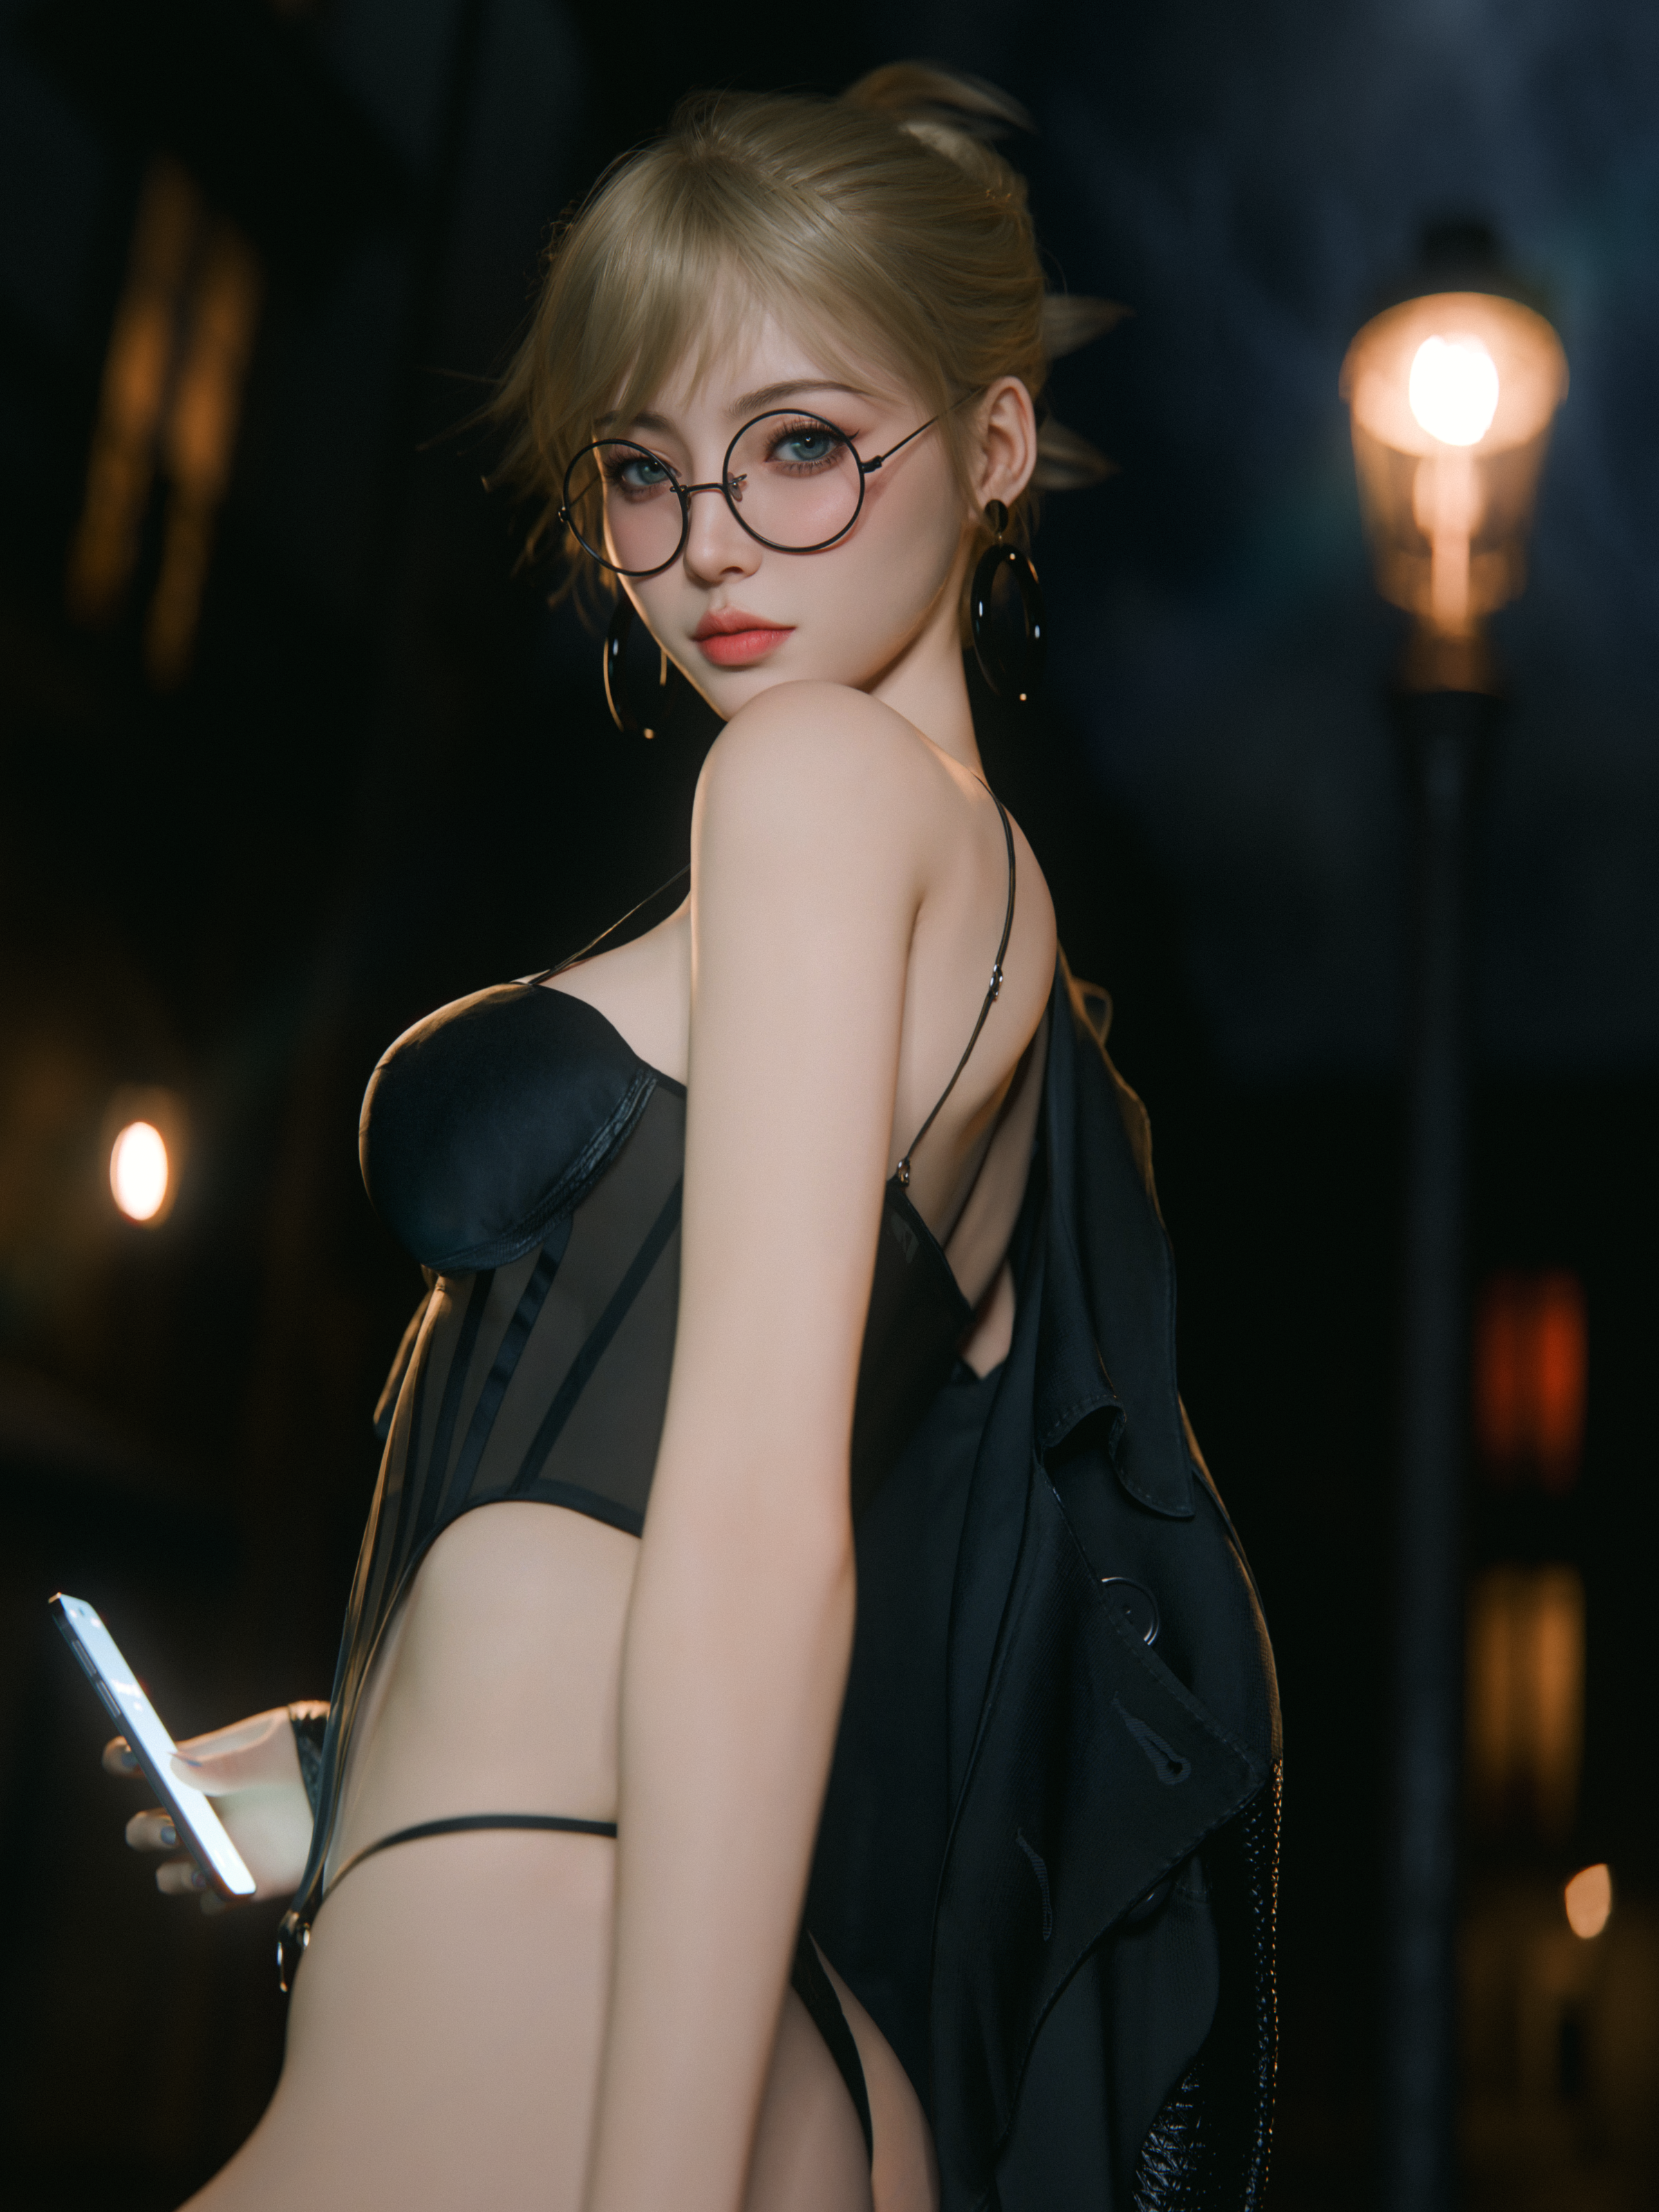 General 2400x3200 Shoe Lac3 digital art artwork women blonde underwear blurry background earring looking at viewer night glasses women with glasses smartphone holding phone portrait display phone closed mouth depth of field standing hoop earrings ass painted nails